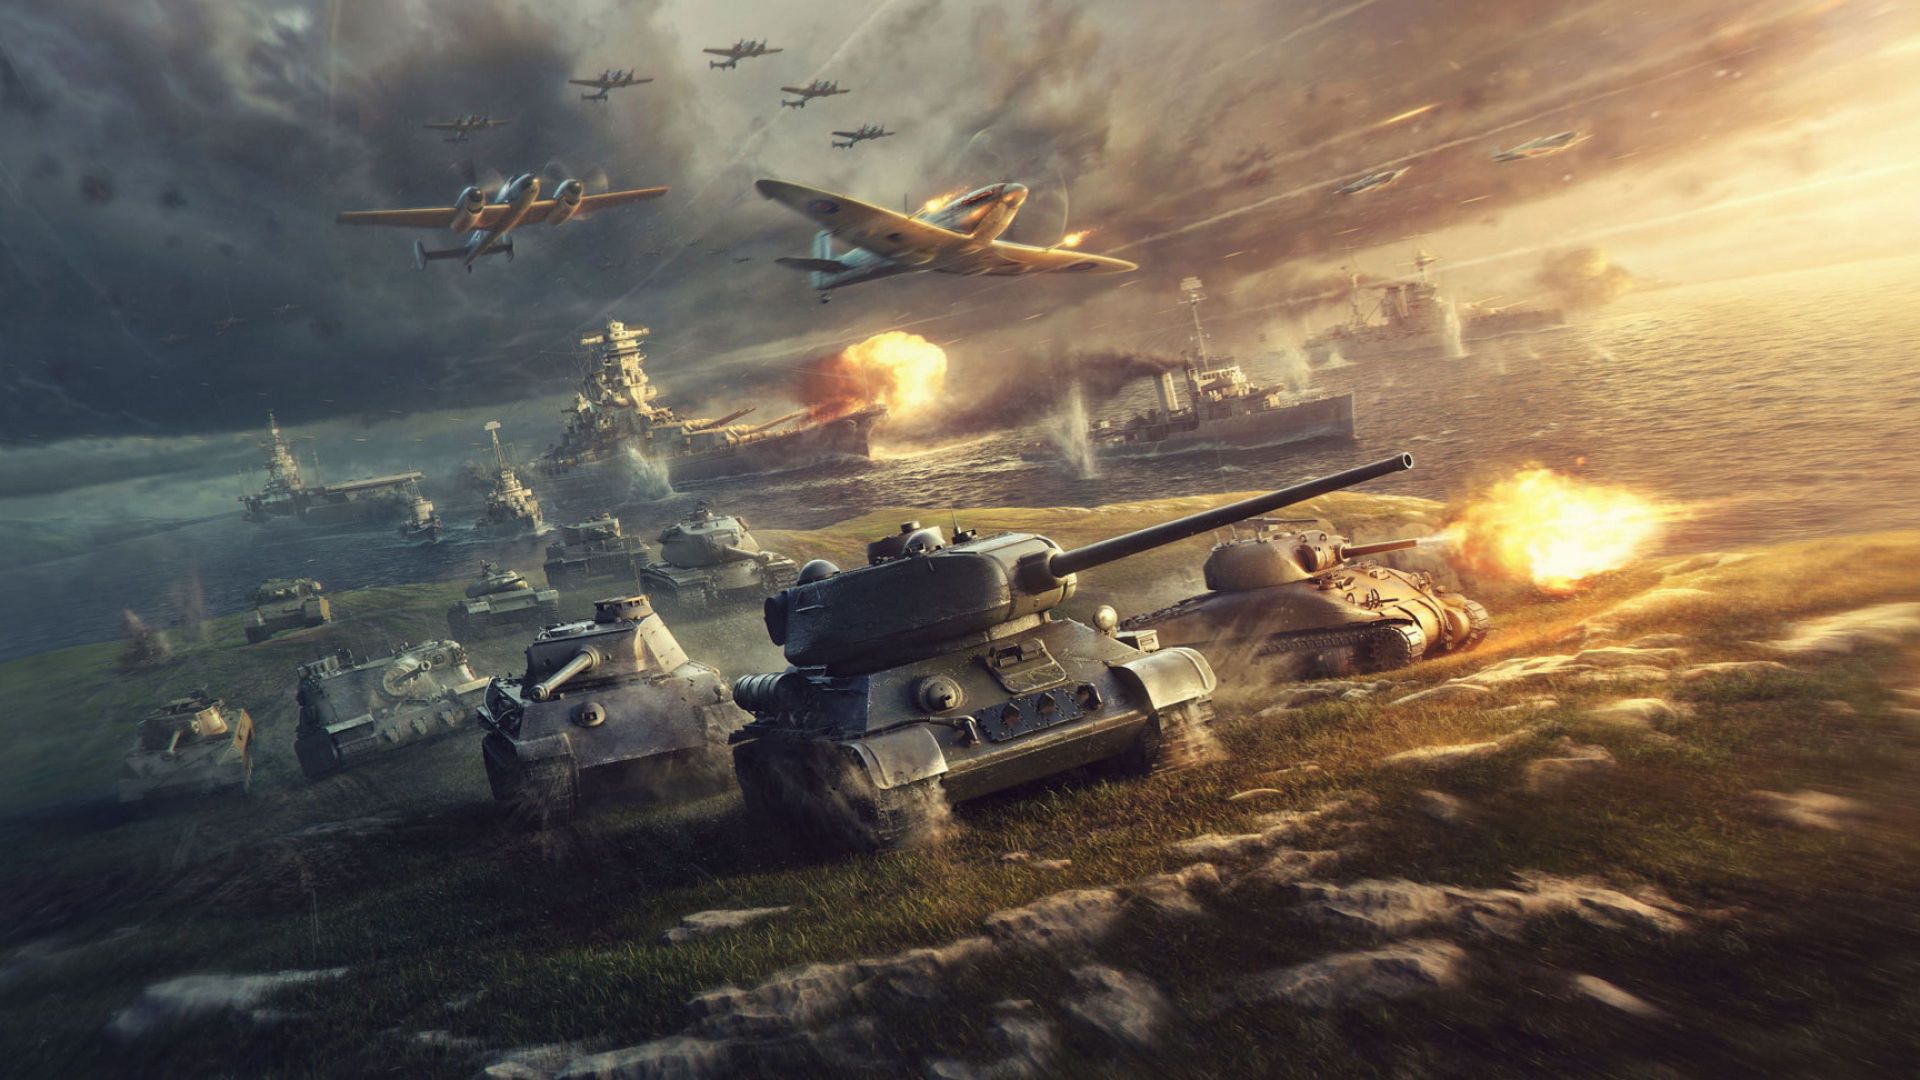 Wallpaper World of Tanks, tanks and fighter aircraft, online game, 4k